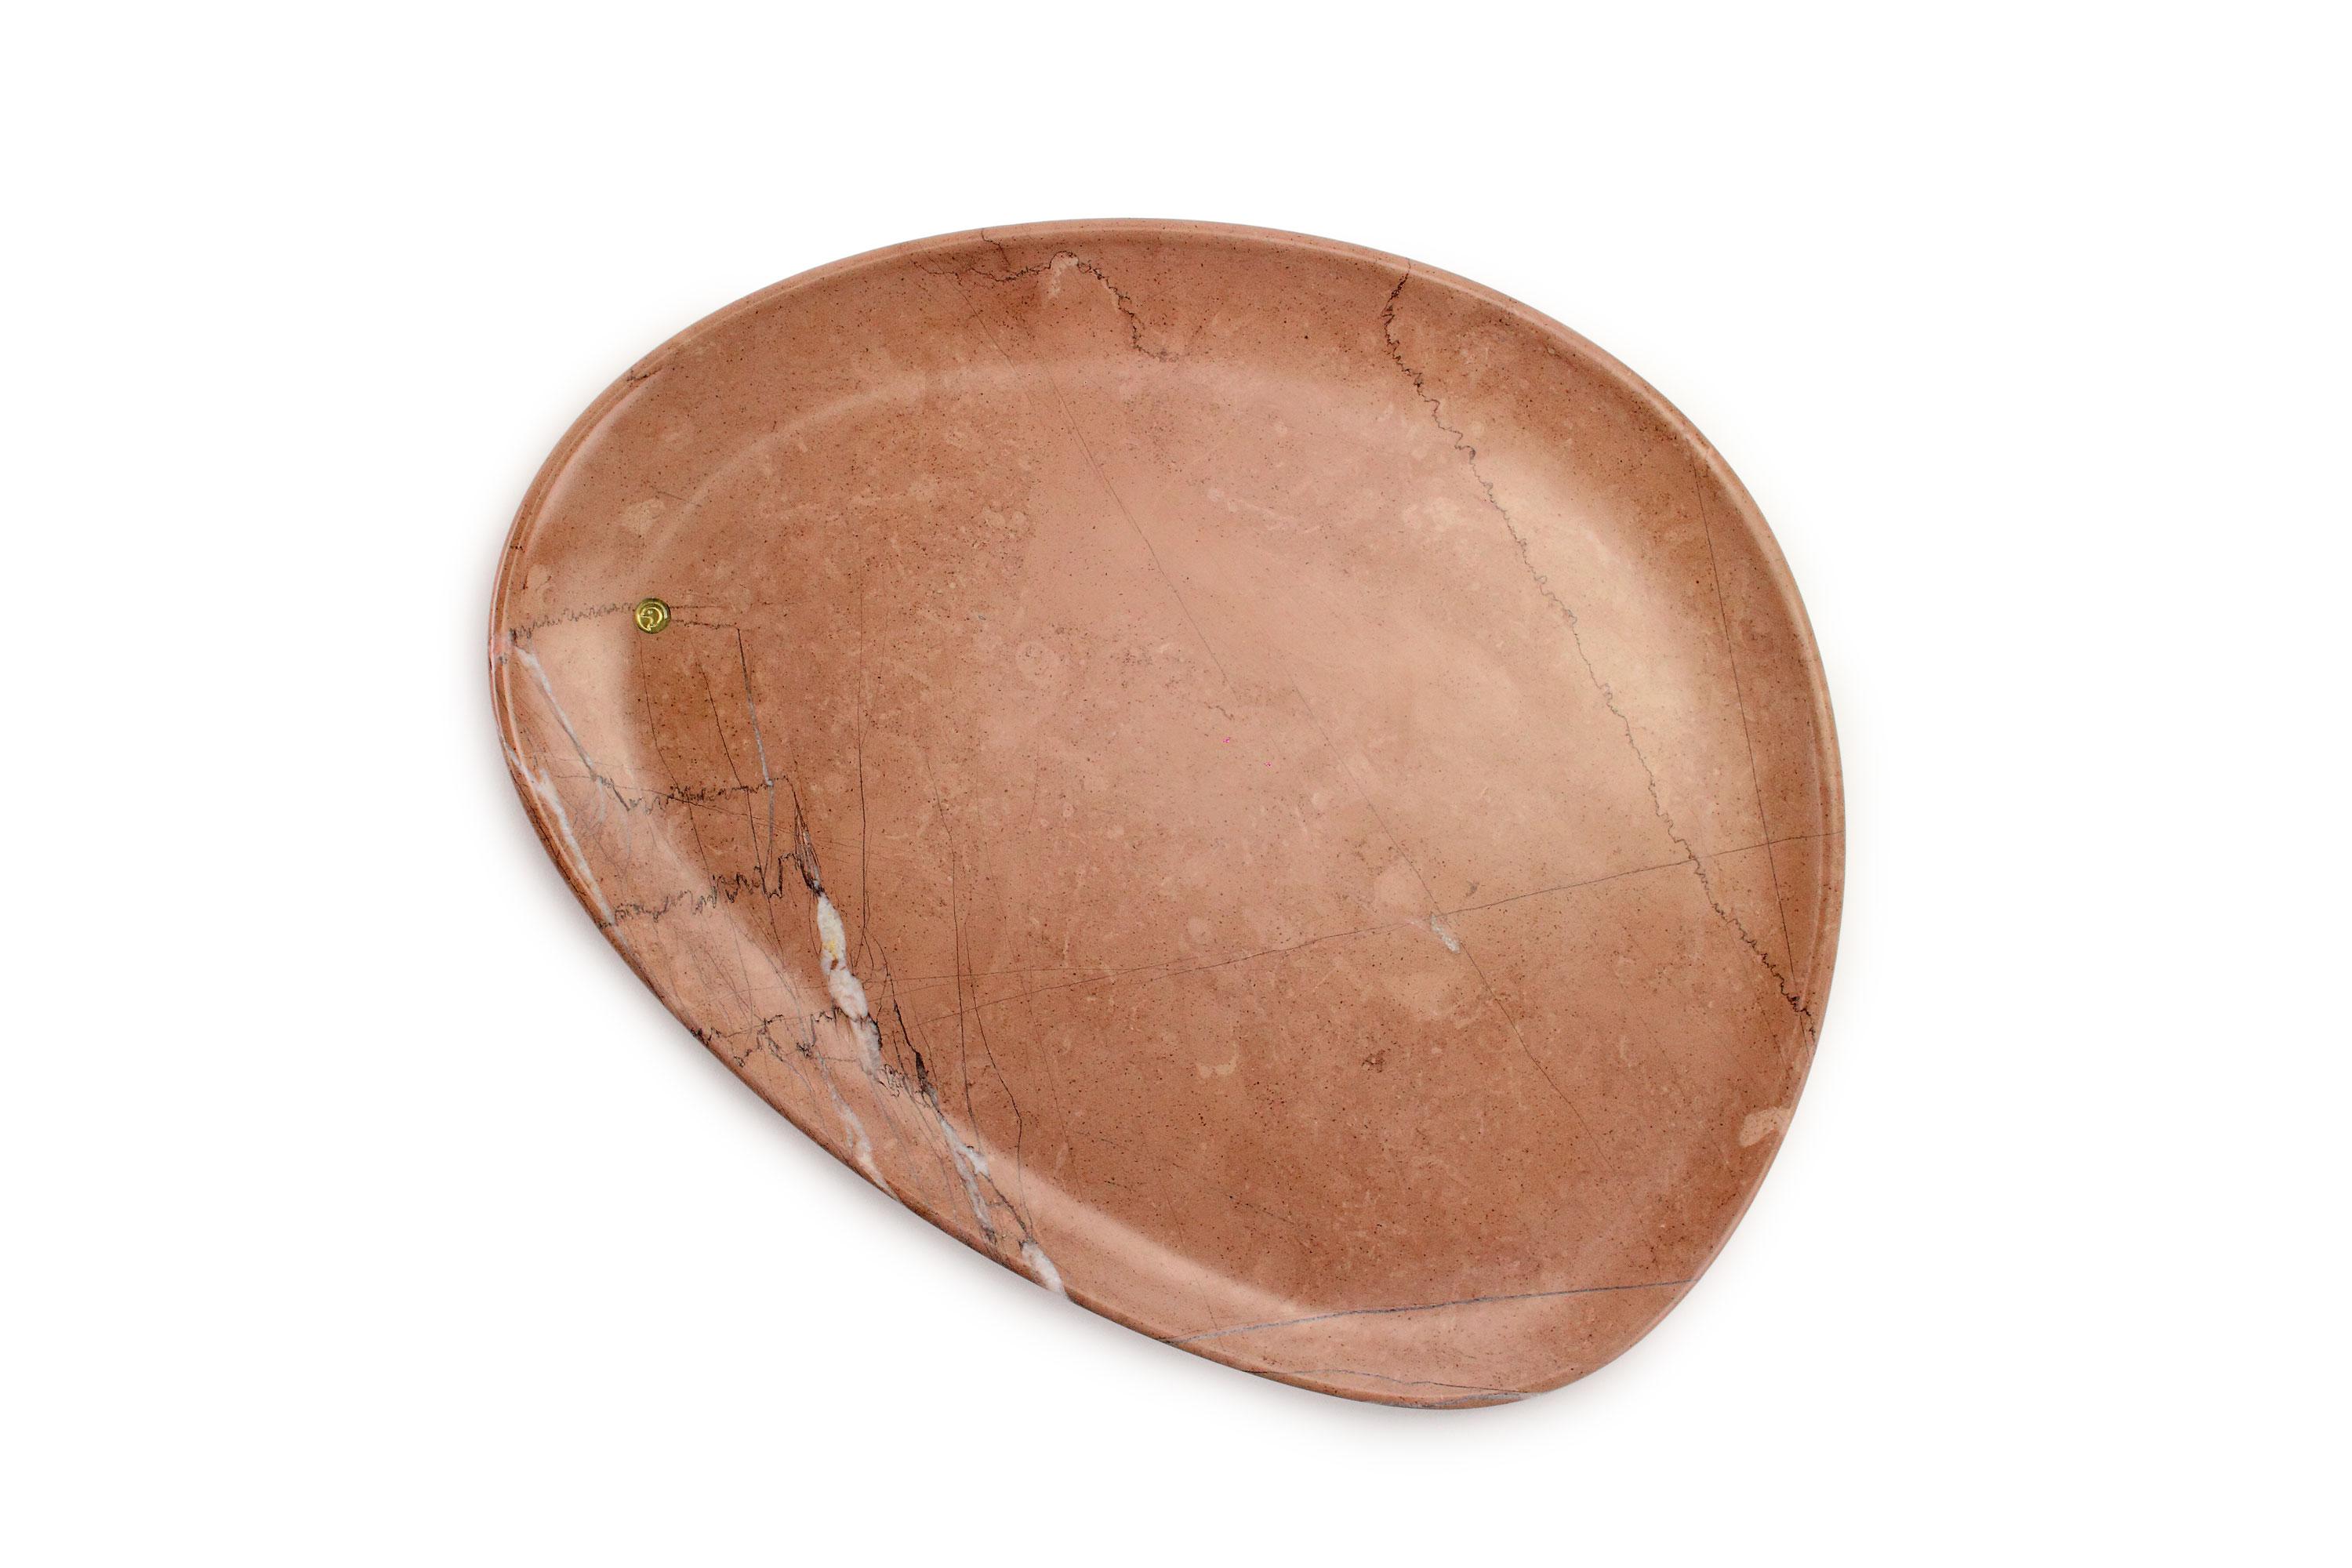 Modern Plate Platter Tableware Pink Assisi Stone Collectible Design Italy Hand-carved